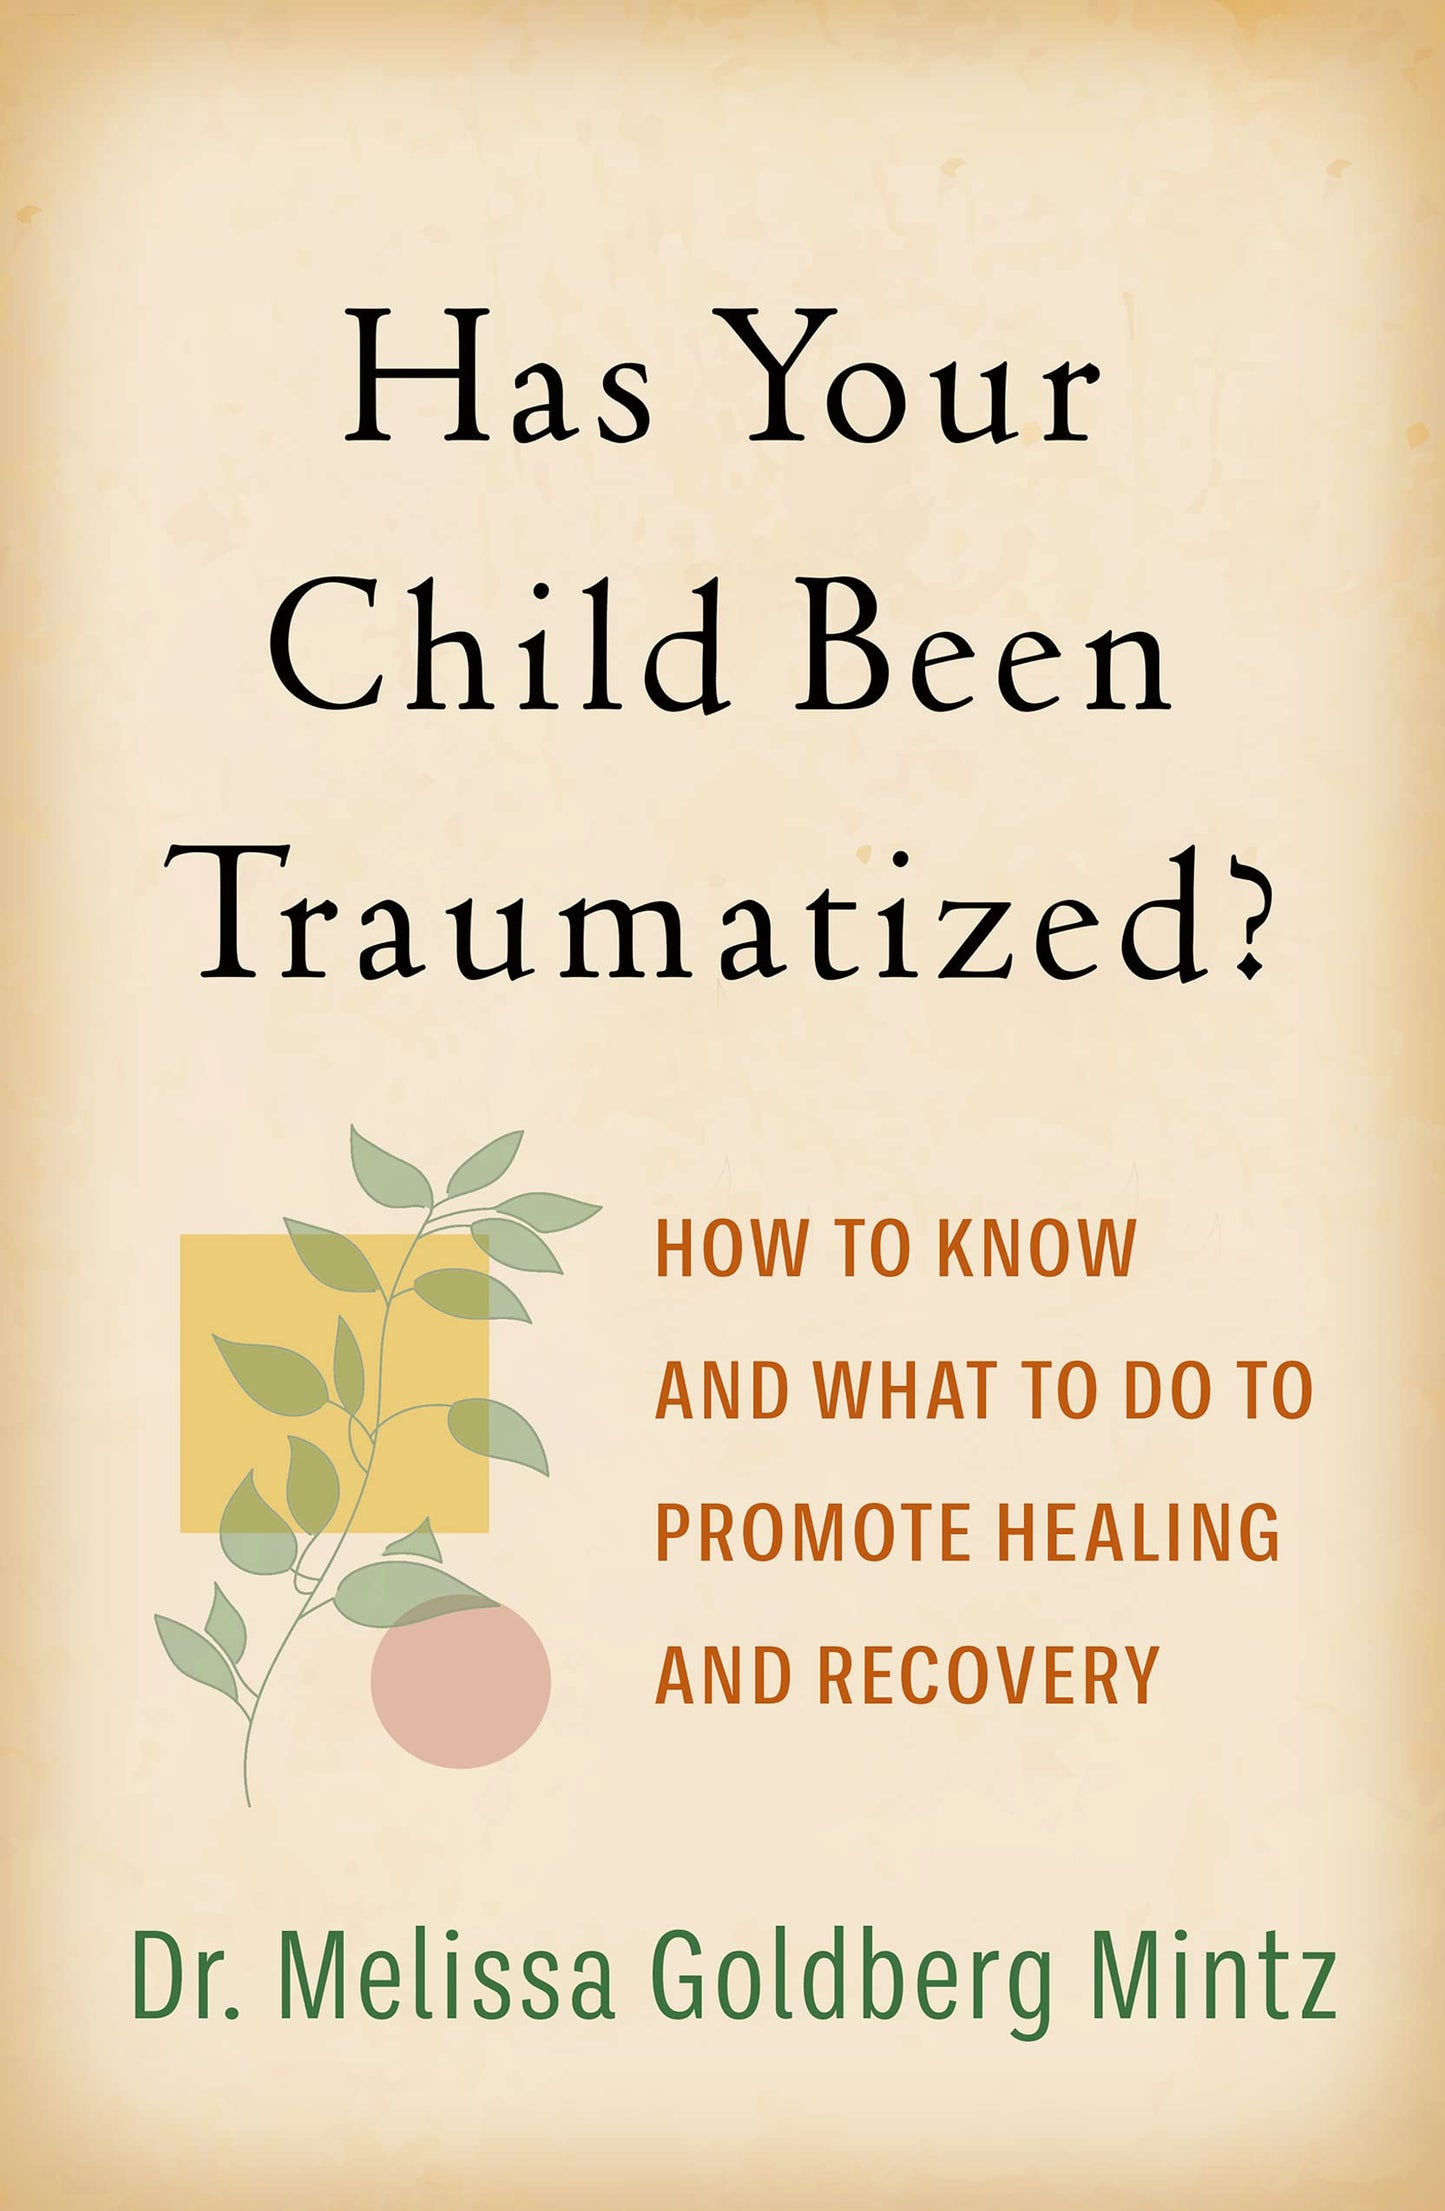 Has Your Child Been Traumatized? by Dr. Melissa Goldberg Mintz